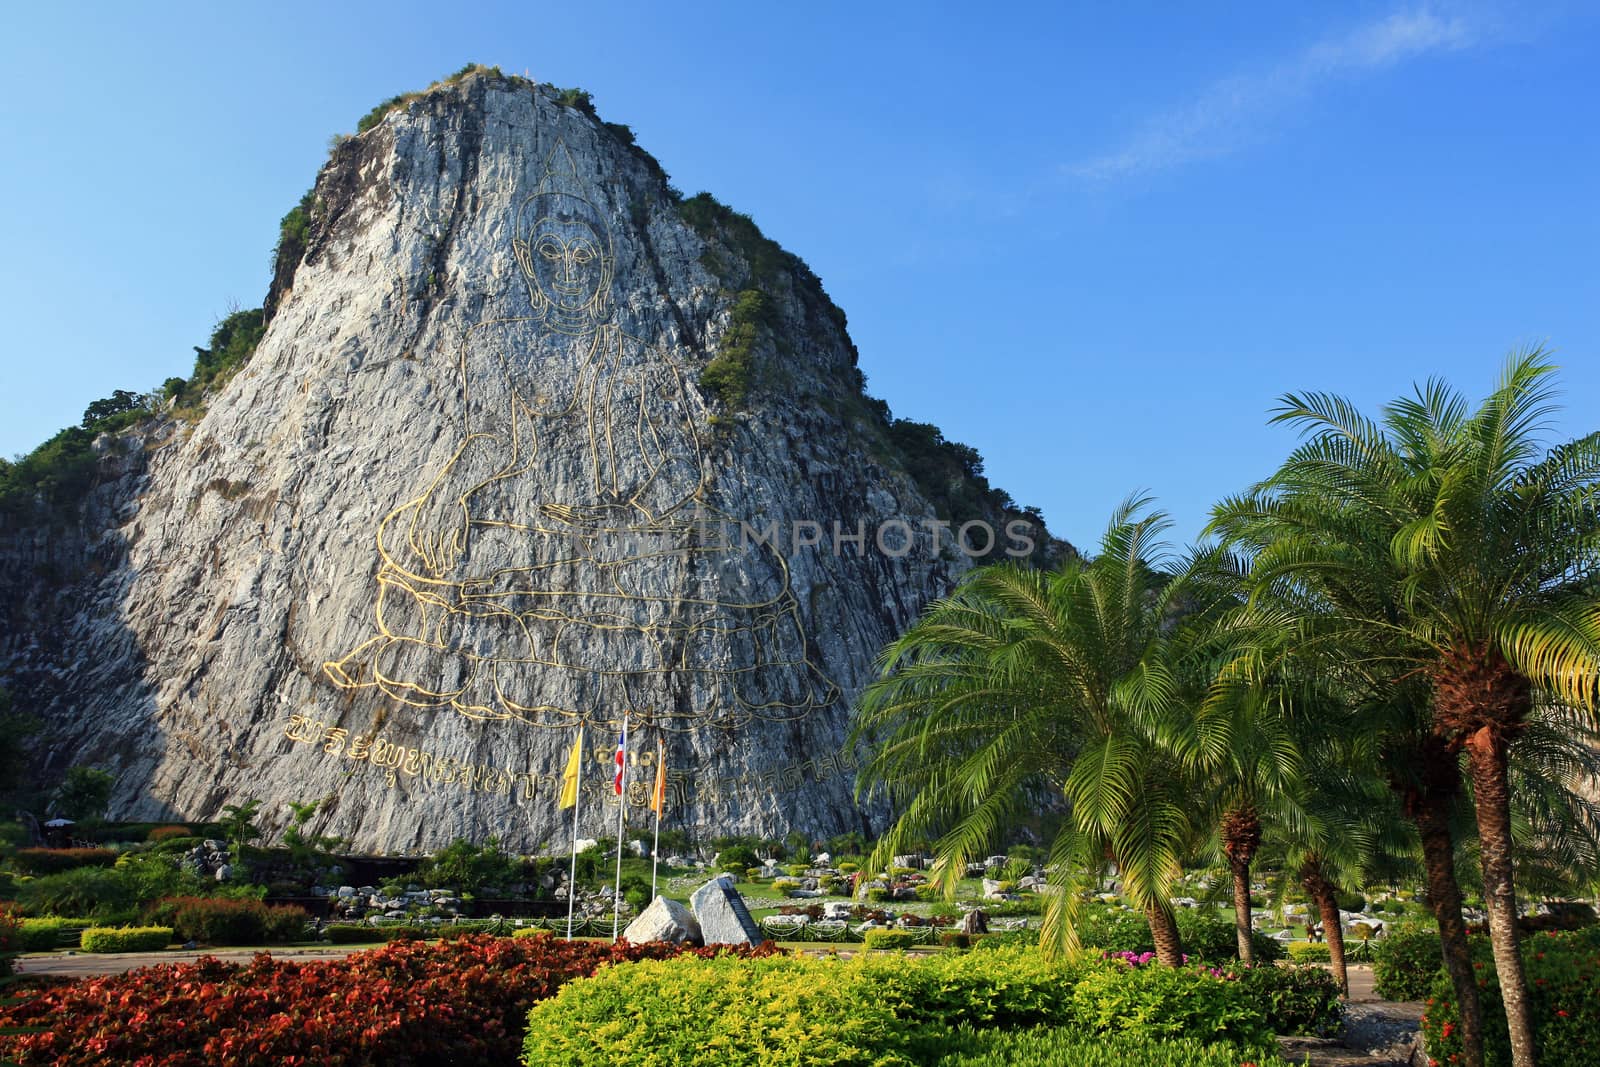 The most biggest buddha engraved with laser beam with 109 meters height. Stay at Chonburi, Thailand